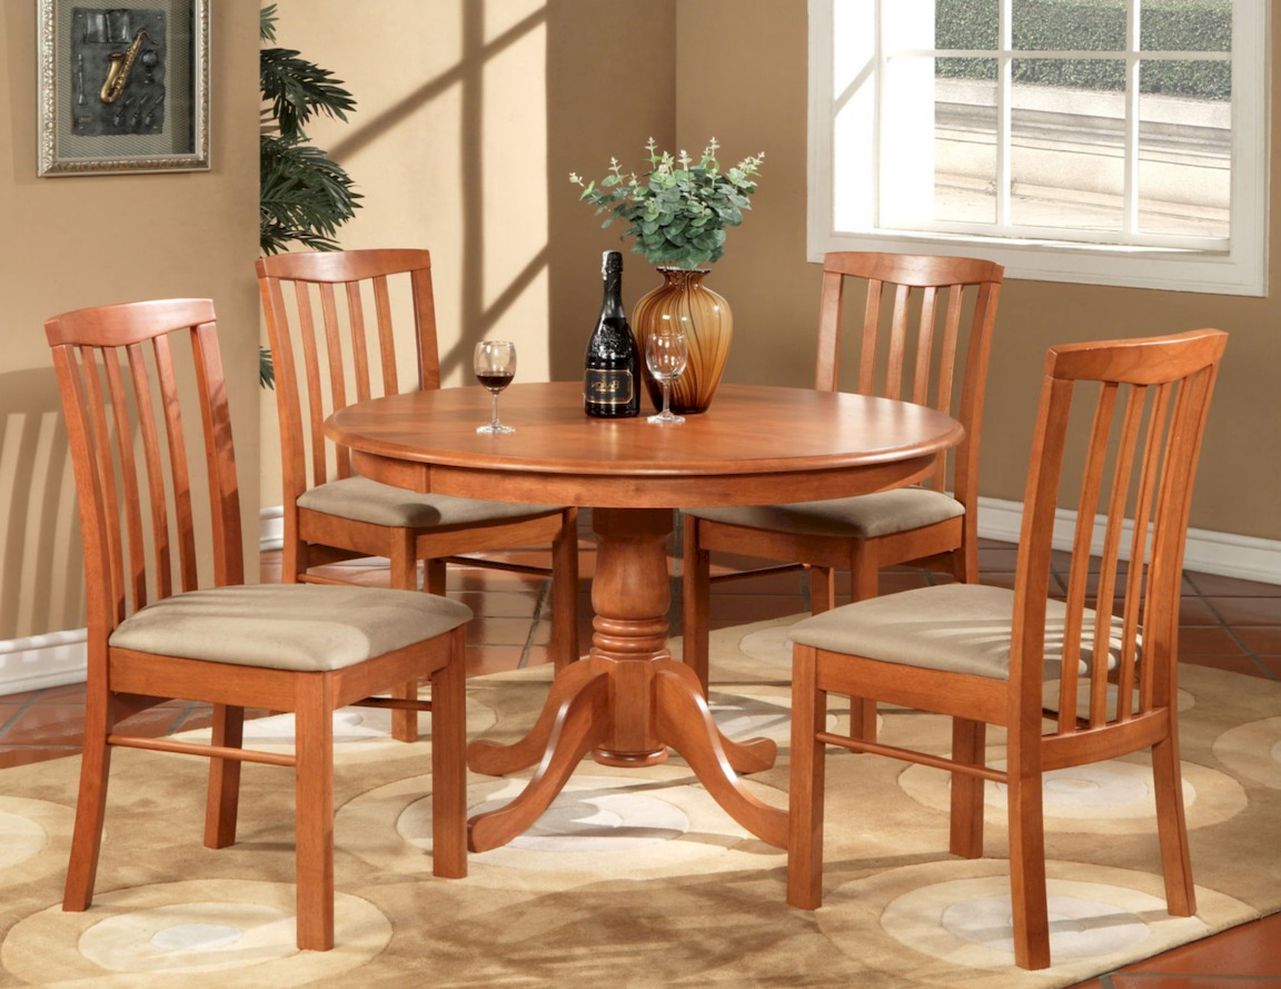 Round Kitchen Table And Chairs photo - 2